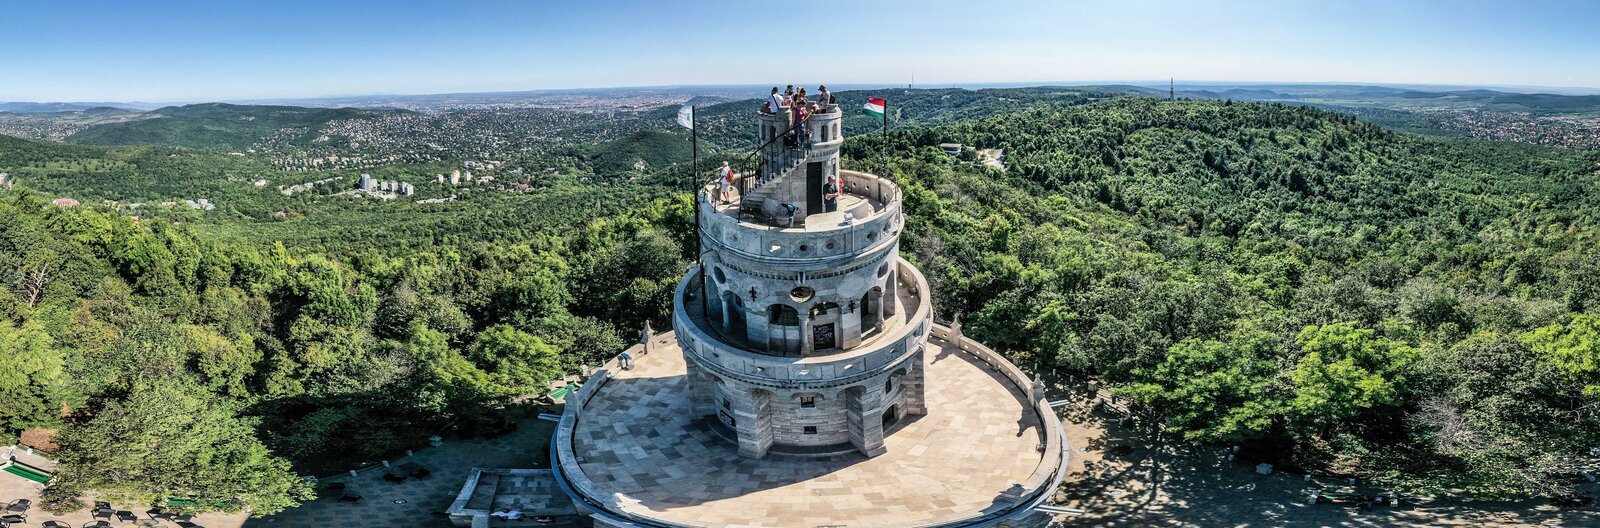 5 best lookout towers in Budapest for spring hikes